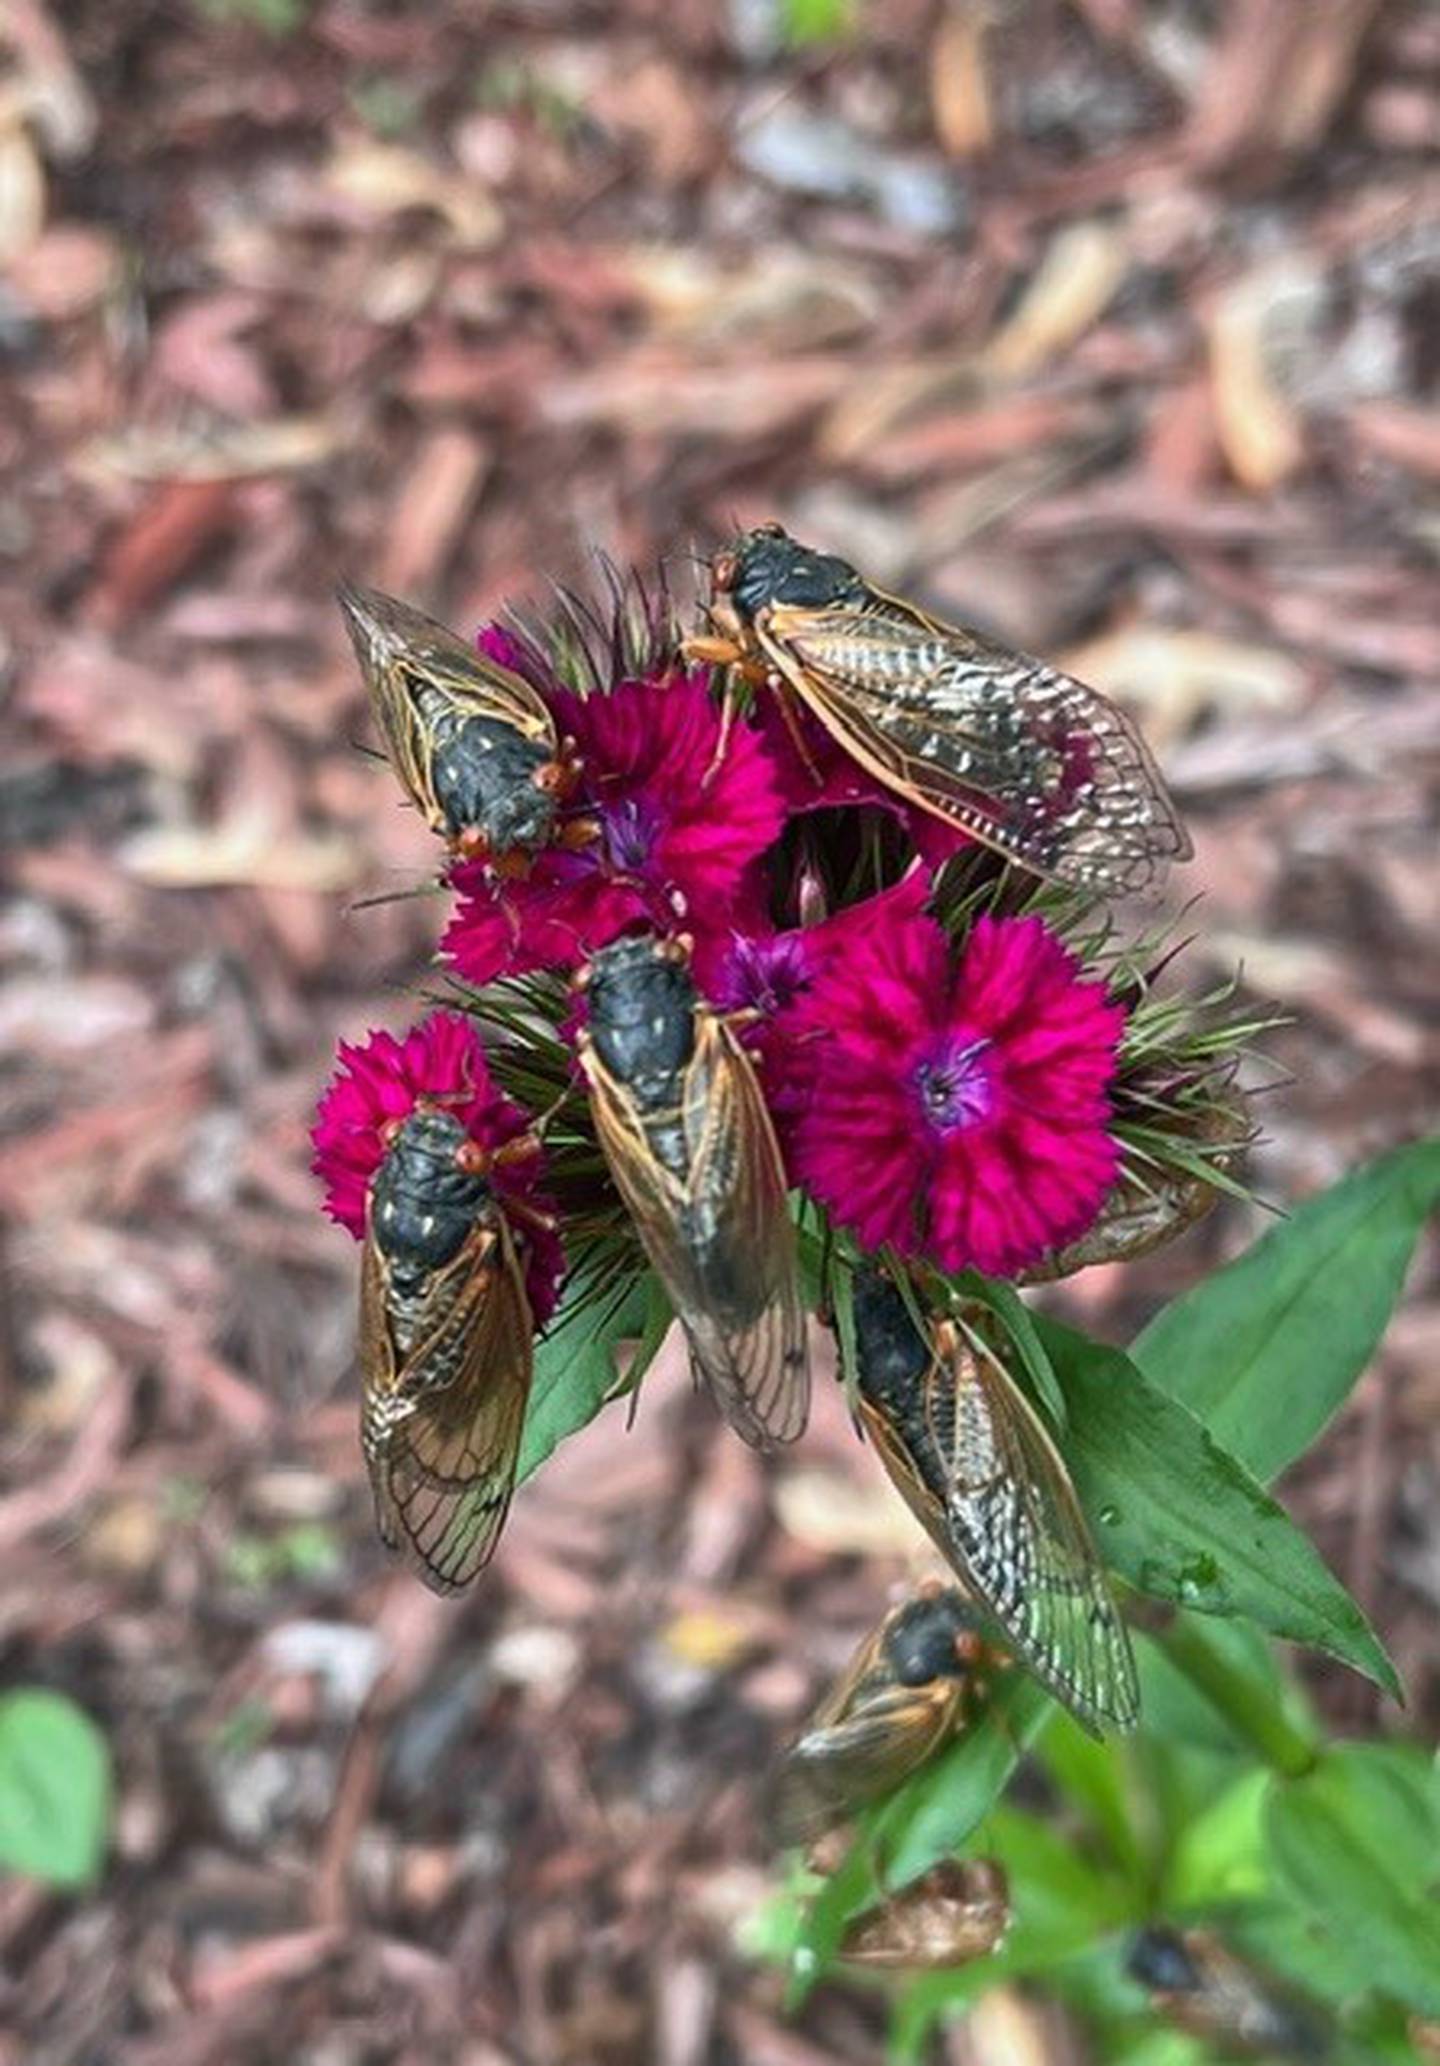 Master gardener Jean Kadar of New Lenox found these cicadas in her garden.Nancy Kuhajda, program coordinator, the University of Illinois Extension office in Will County, said the ground temperature needs to be 64 degrees for cicadas to emerge.